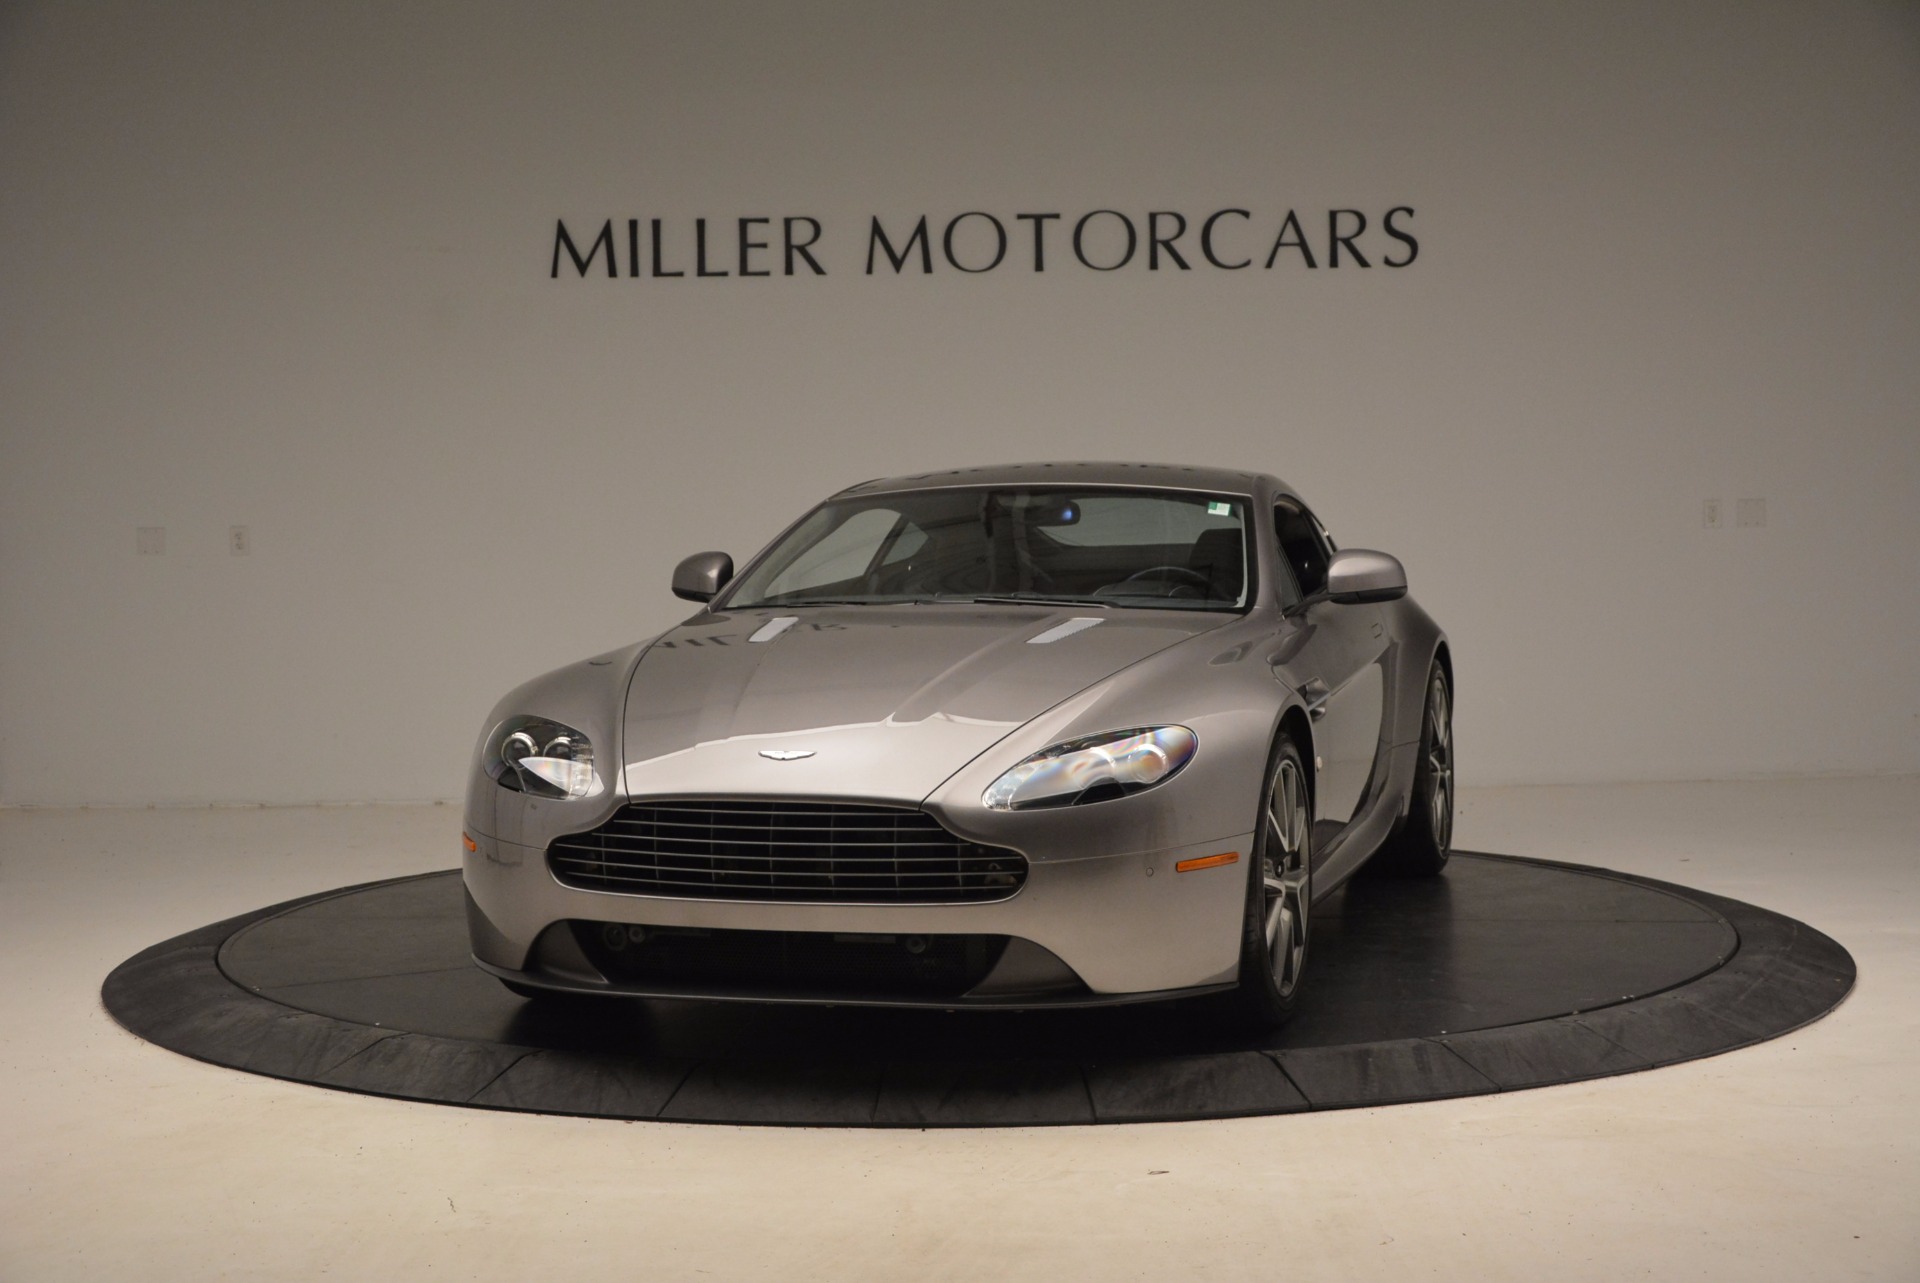 Used 2012 Aston Martin V8 Vantage for sale Sold at Pagani of Greenwich in Greenwich CT 06830 1